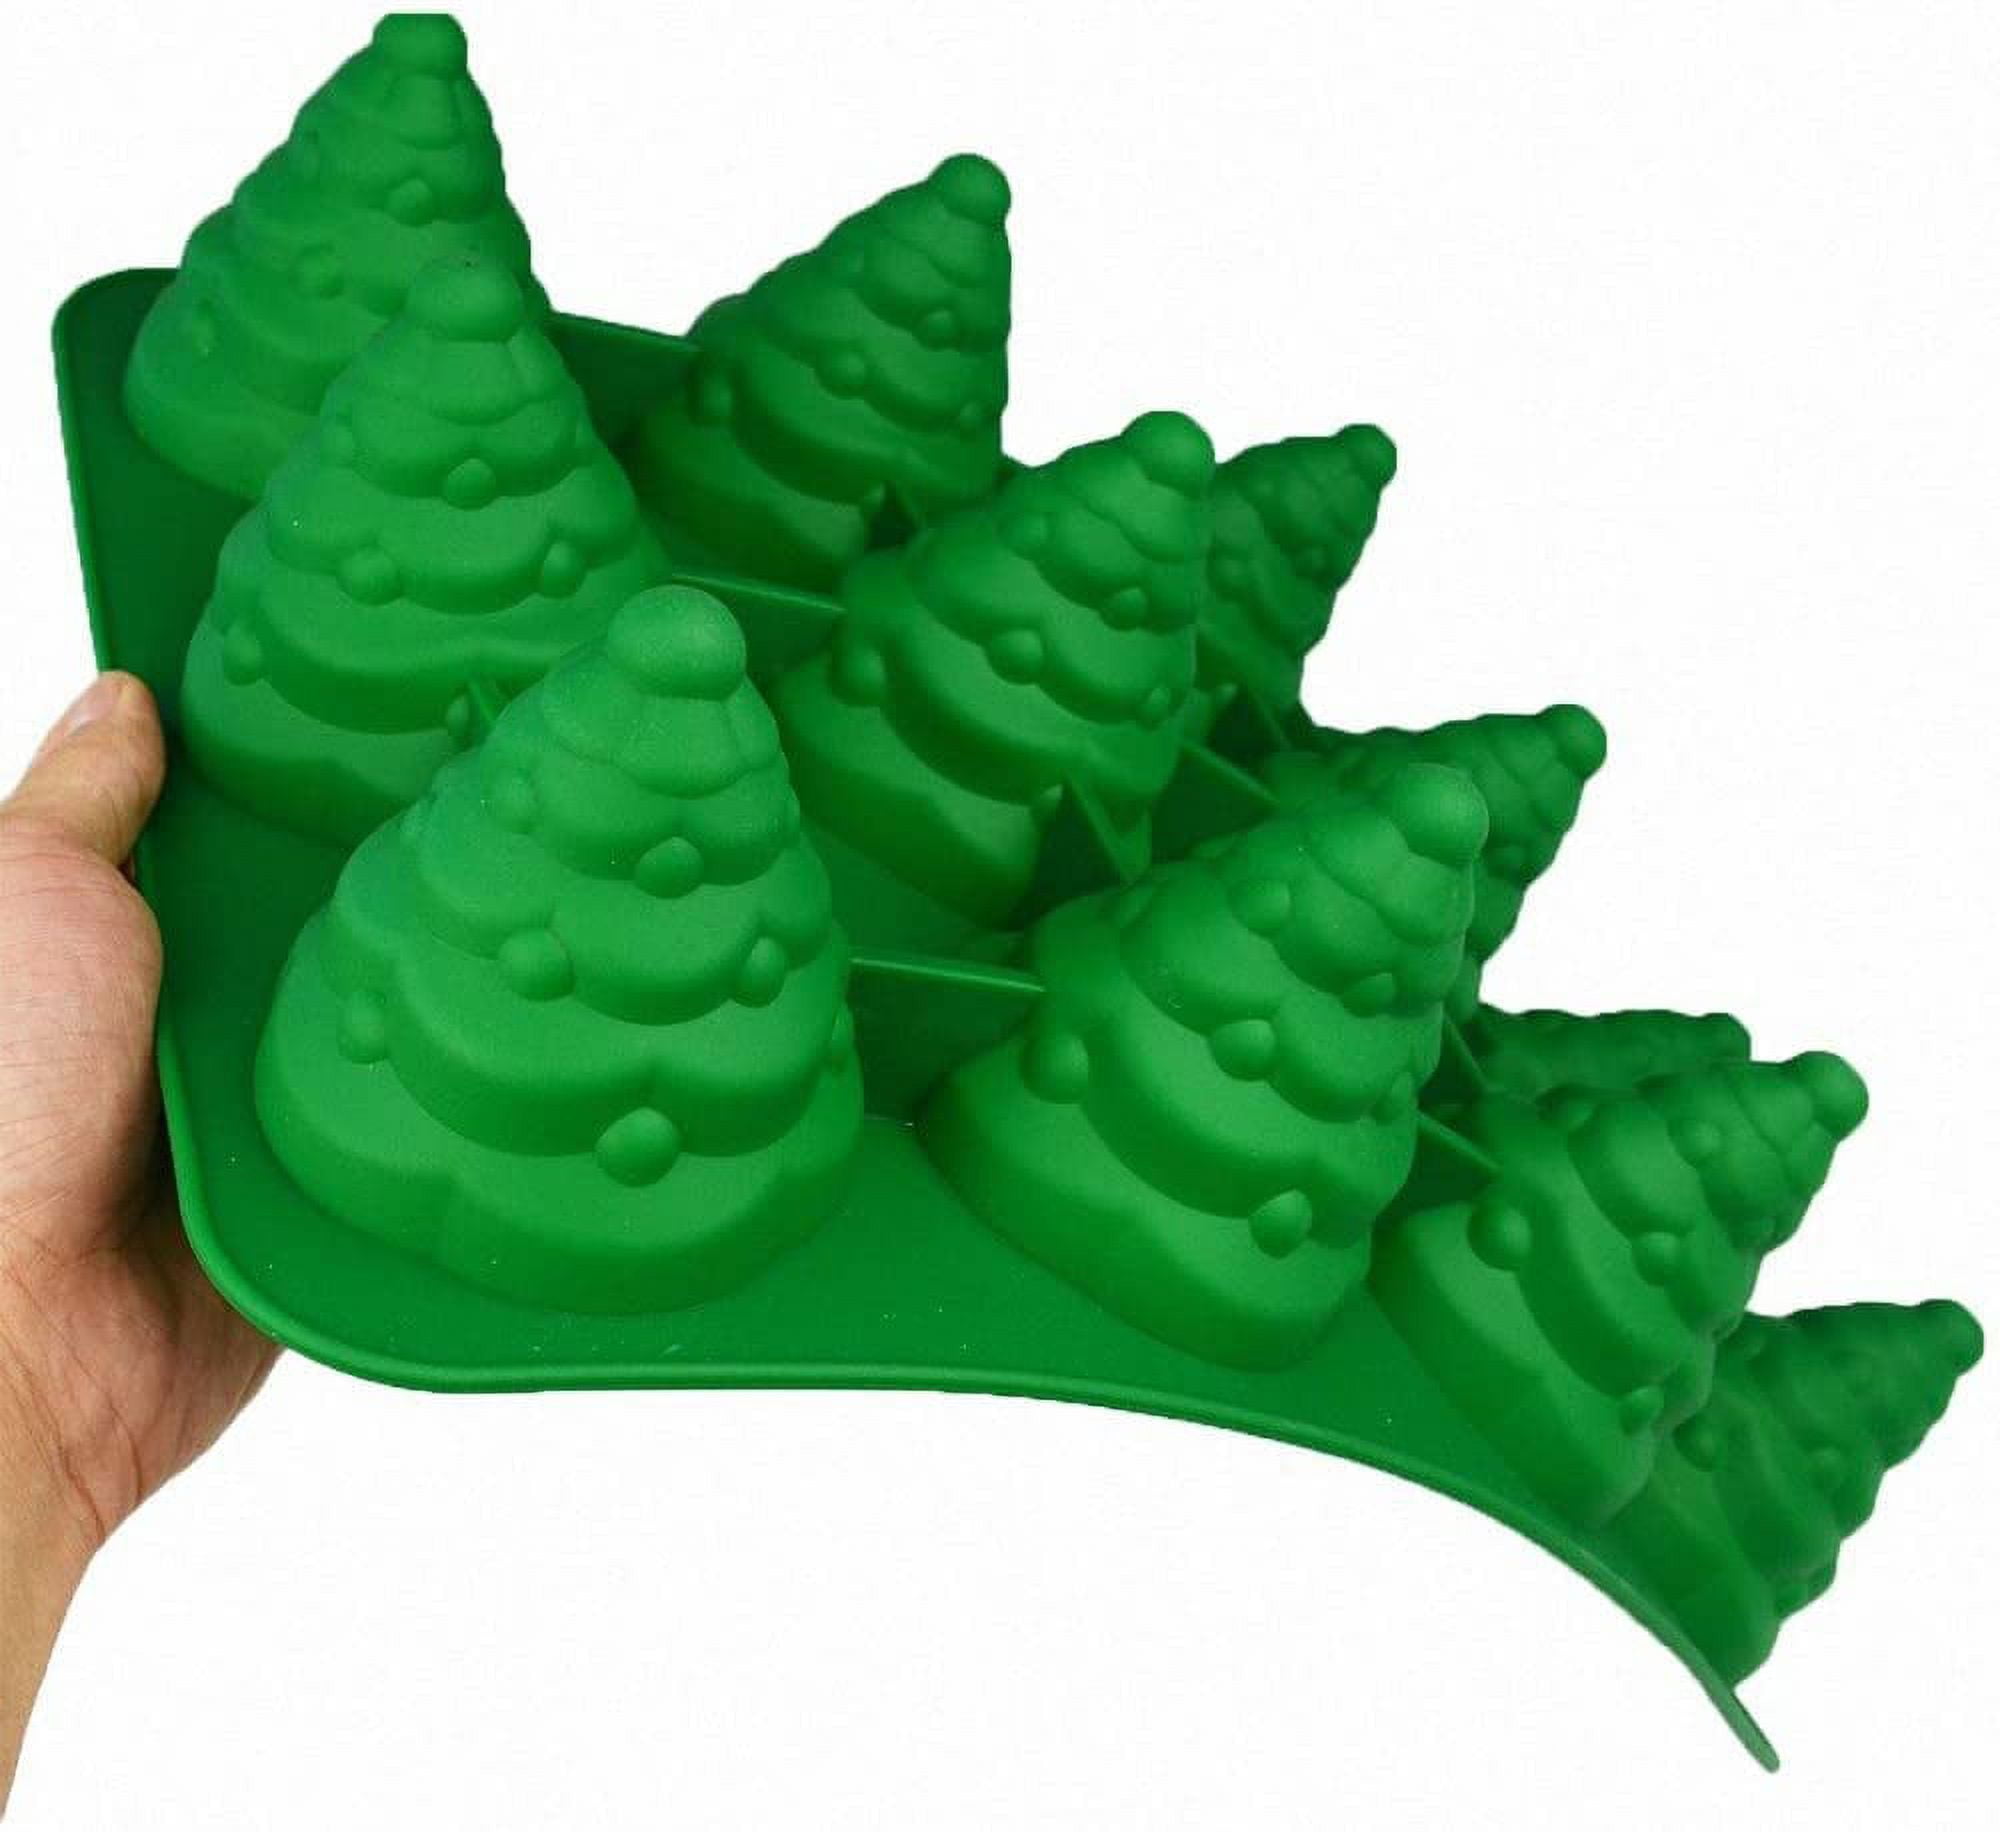 TZnponr 3D Christmas Tree Baking Mould cake pan silicone mold,5 cavities  christmas tree for bread, mousse cake,muffins,ice cubes